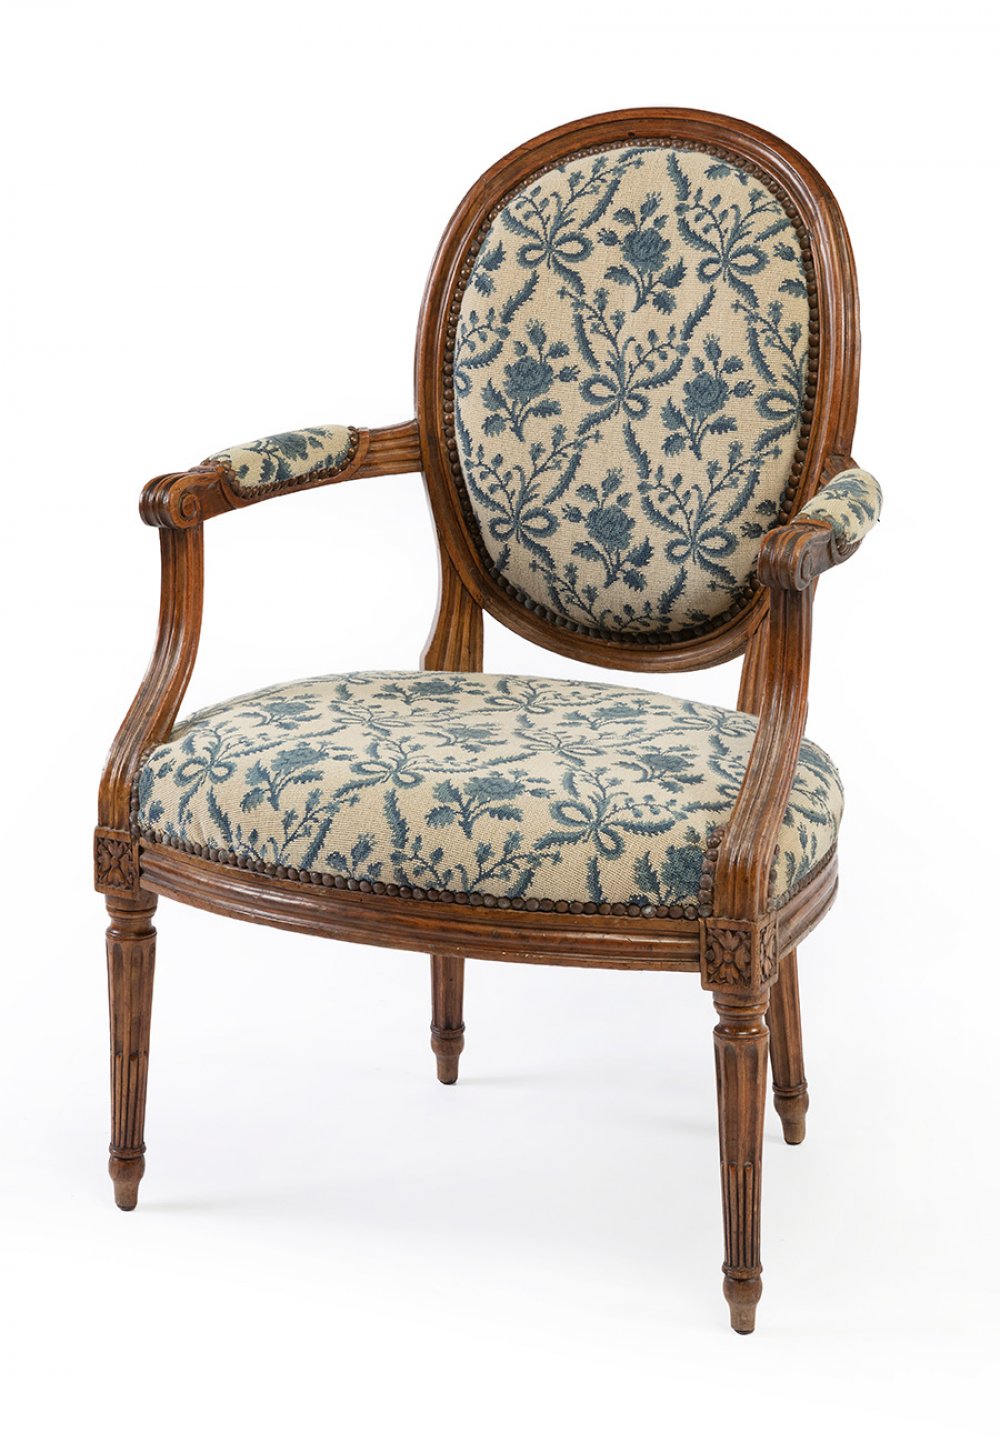 Set of six Louis XVI armchairs, second half of the eighteenth century.Walnut wood. Upholstery with - Image 4 of 7